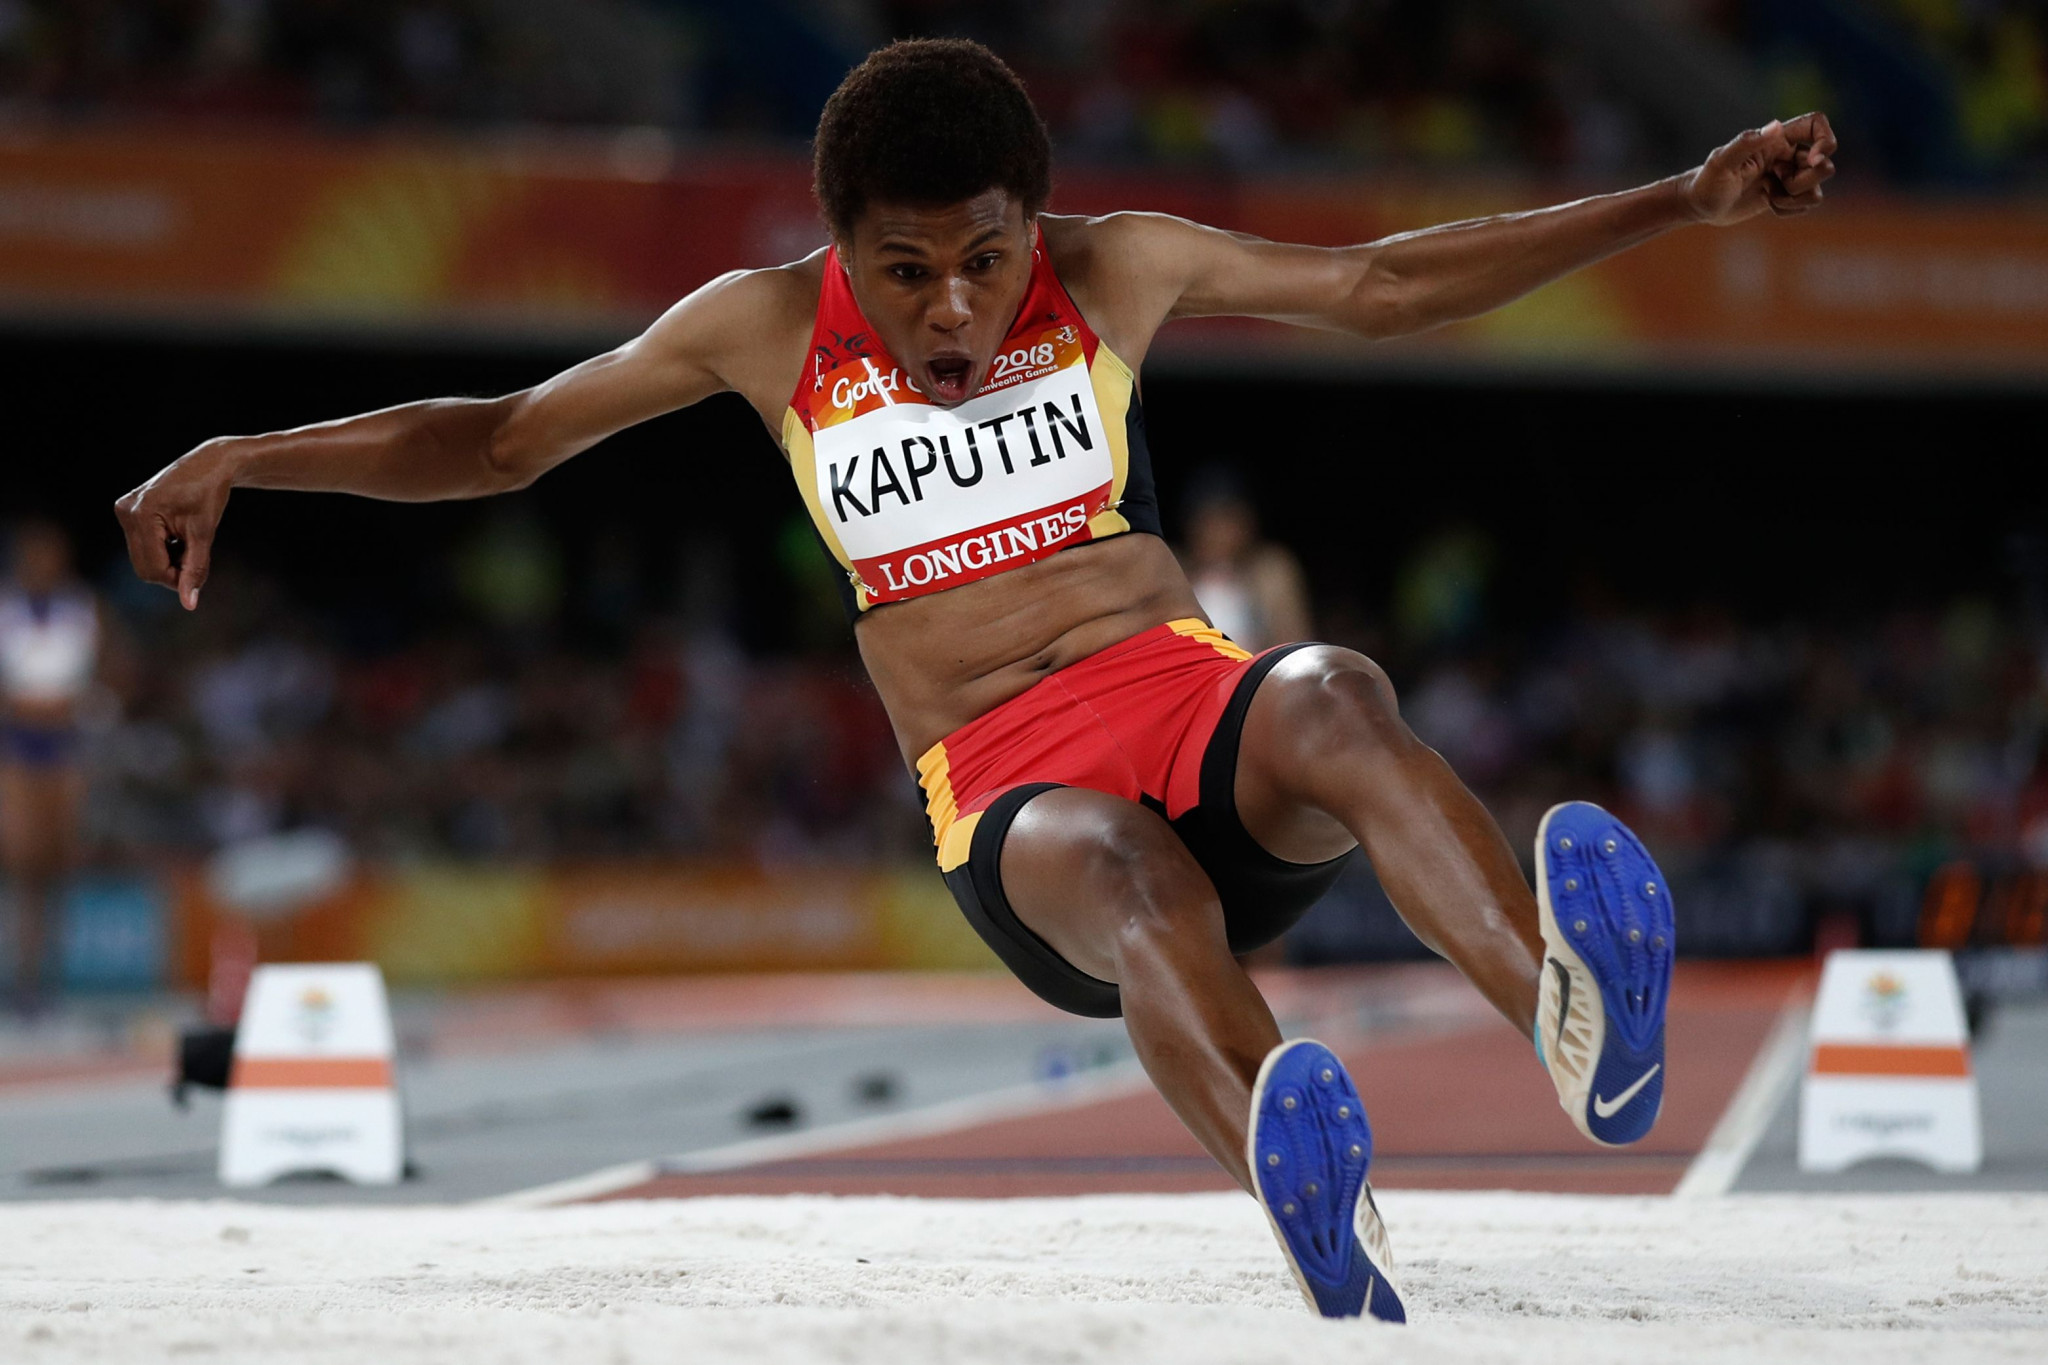 Papua New Guinea’s Rellie Kaputin completed a rare double in the women's horizontal jumps on day three of the Oceania Athletics Championships in Townsville ©Getty Images